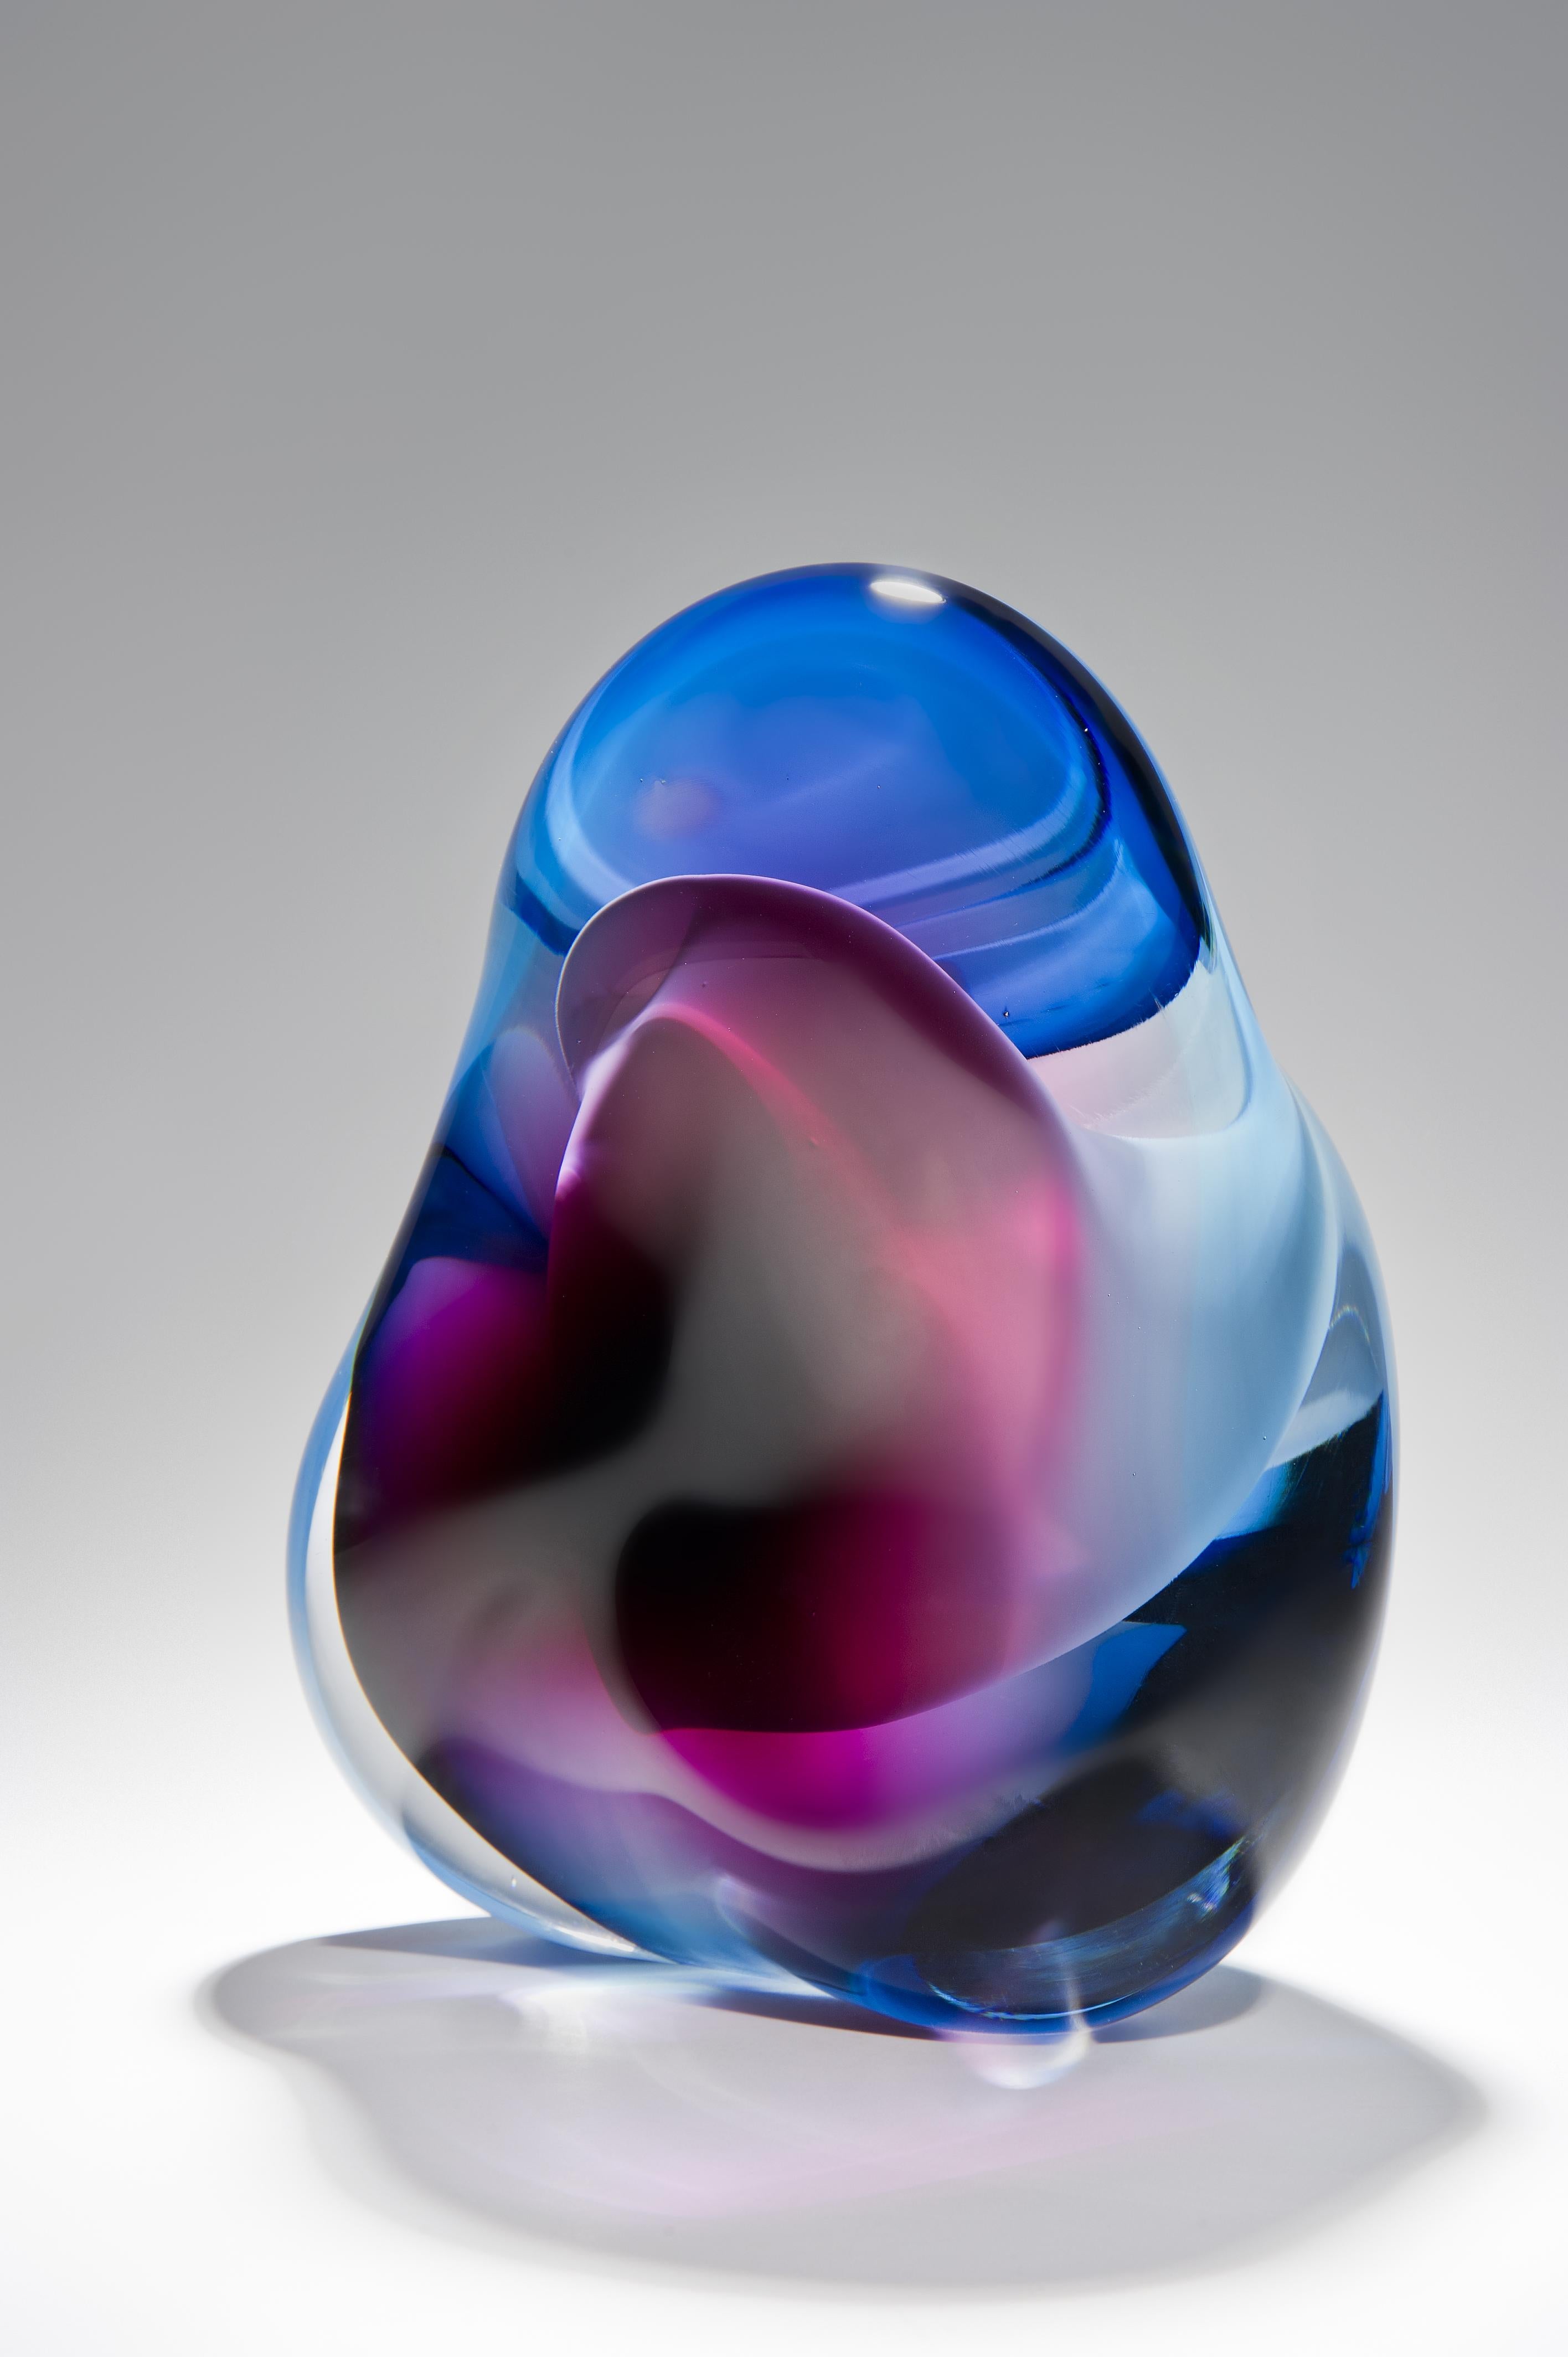 Organic Modern Chromatic Vug in Turquoise and Pink, a Glass Sculpture by Samantha Donaldson